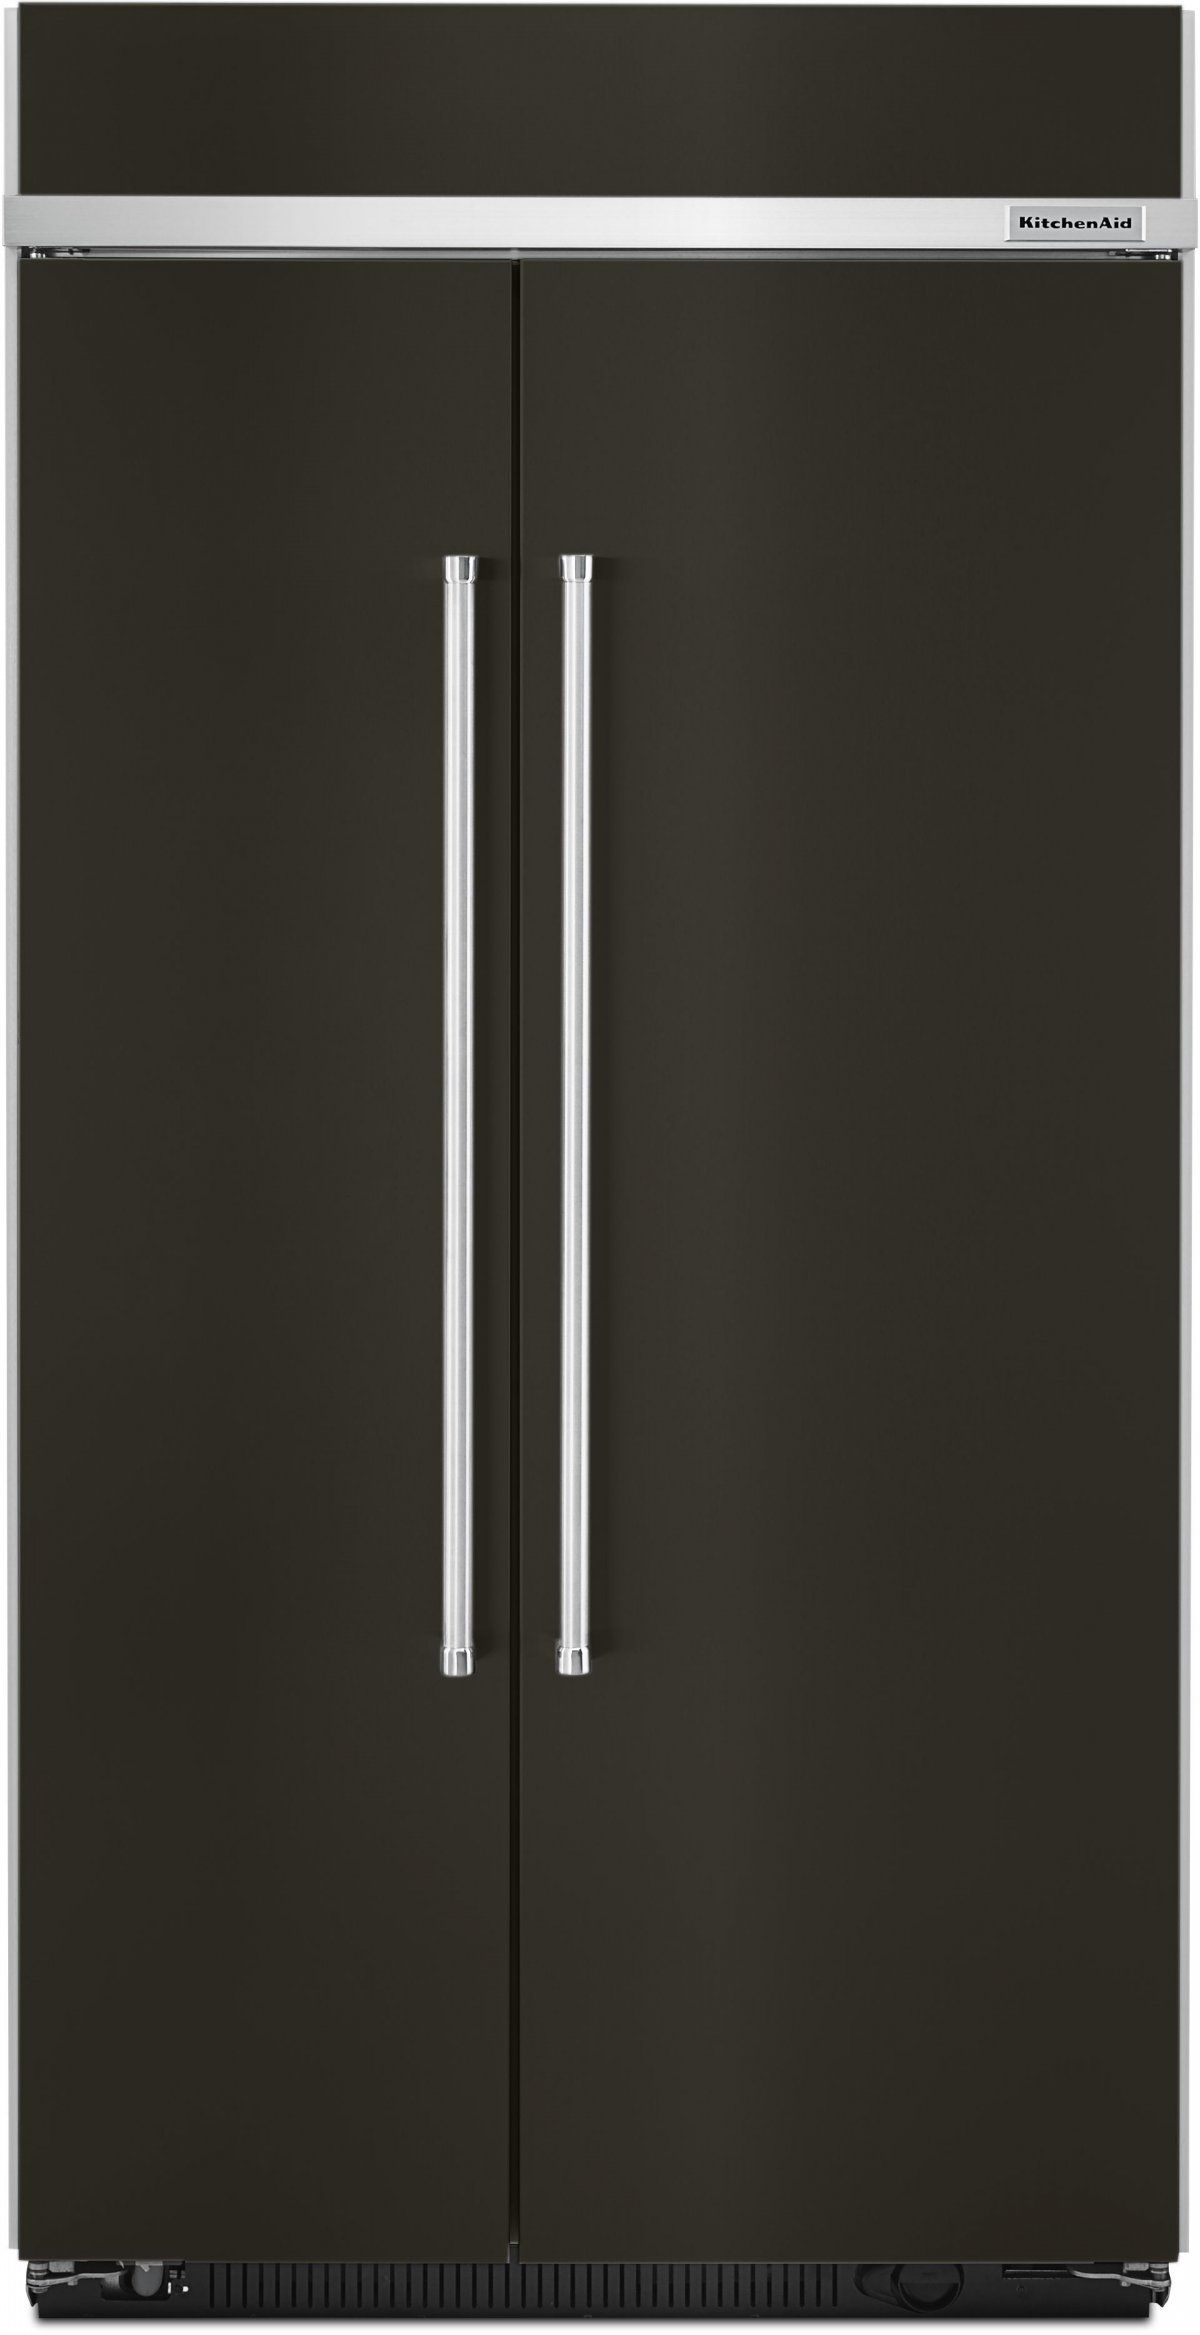 KitchenAid® 25.48 Cu. Ft. Black Stainless Steel Built In Side-By-Side Refrigerator